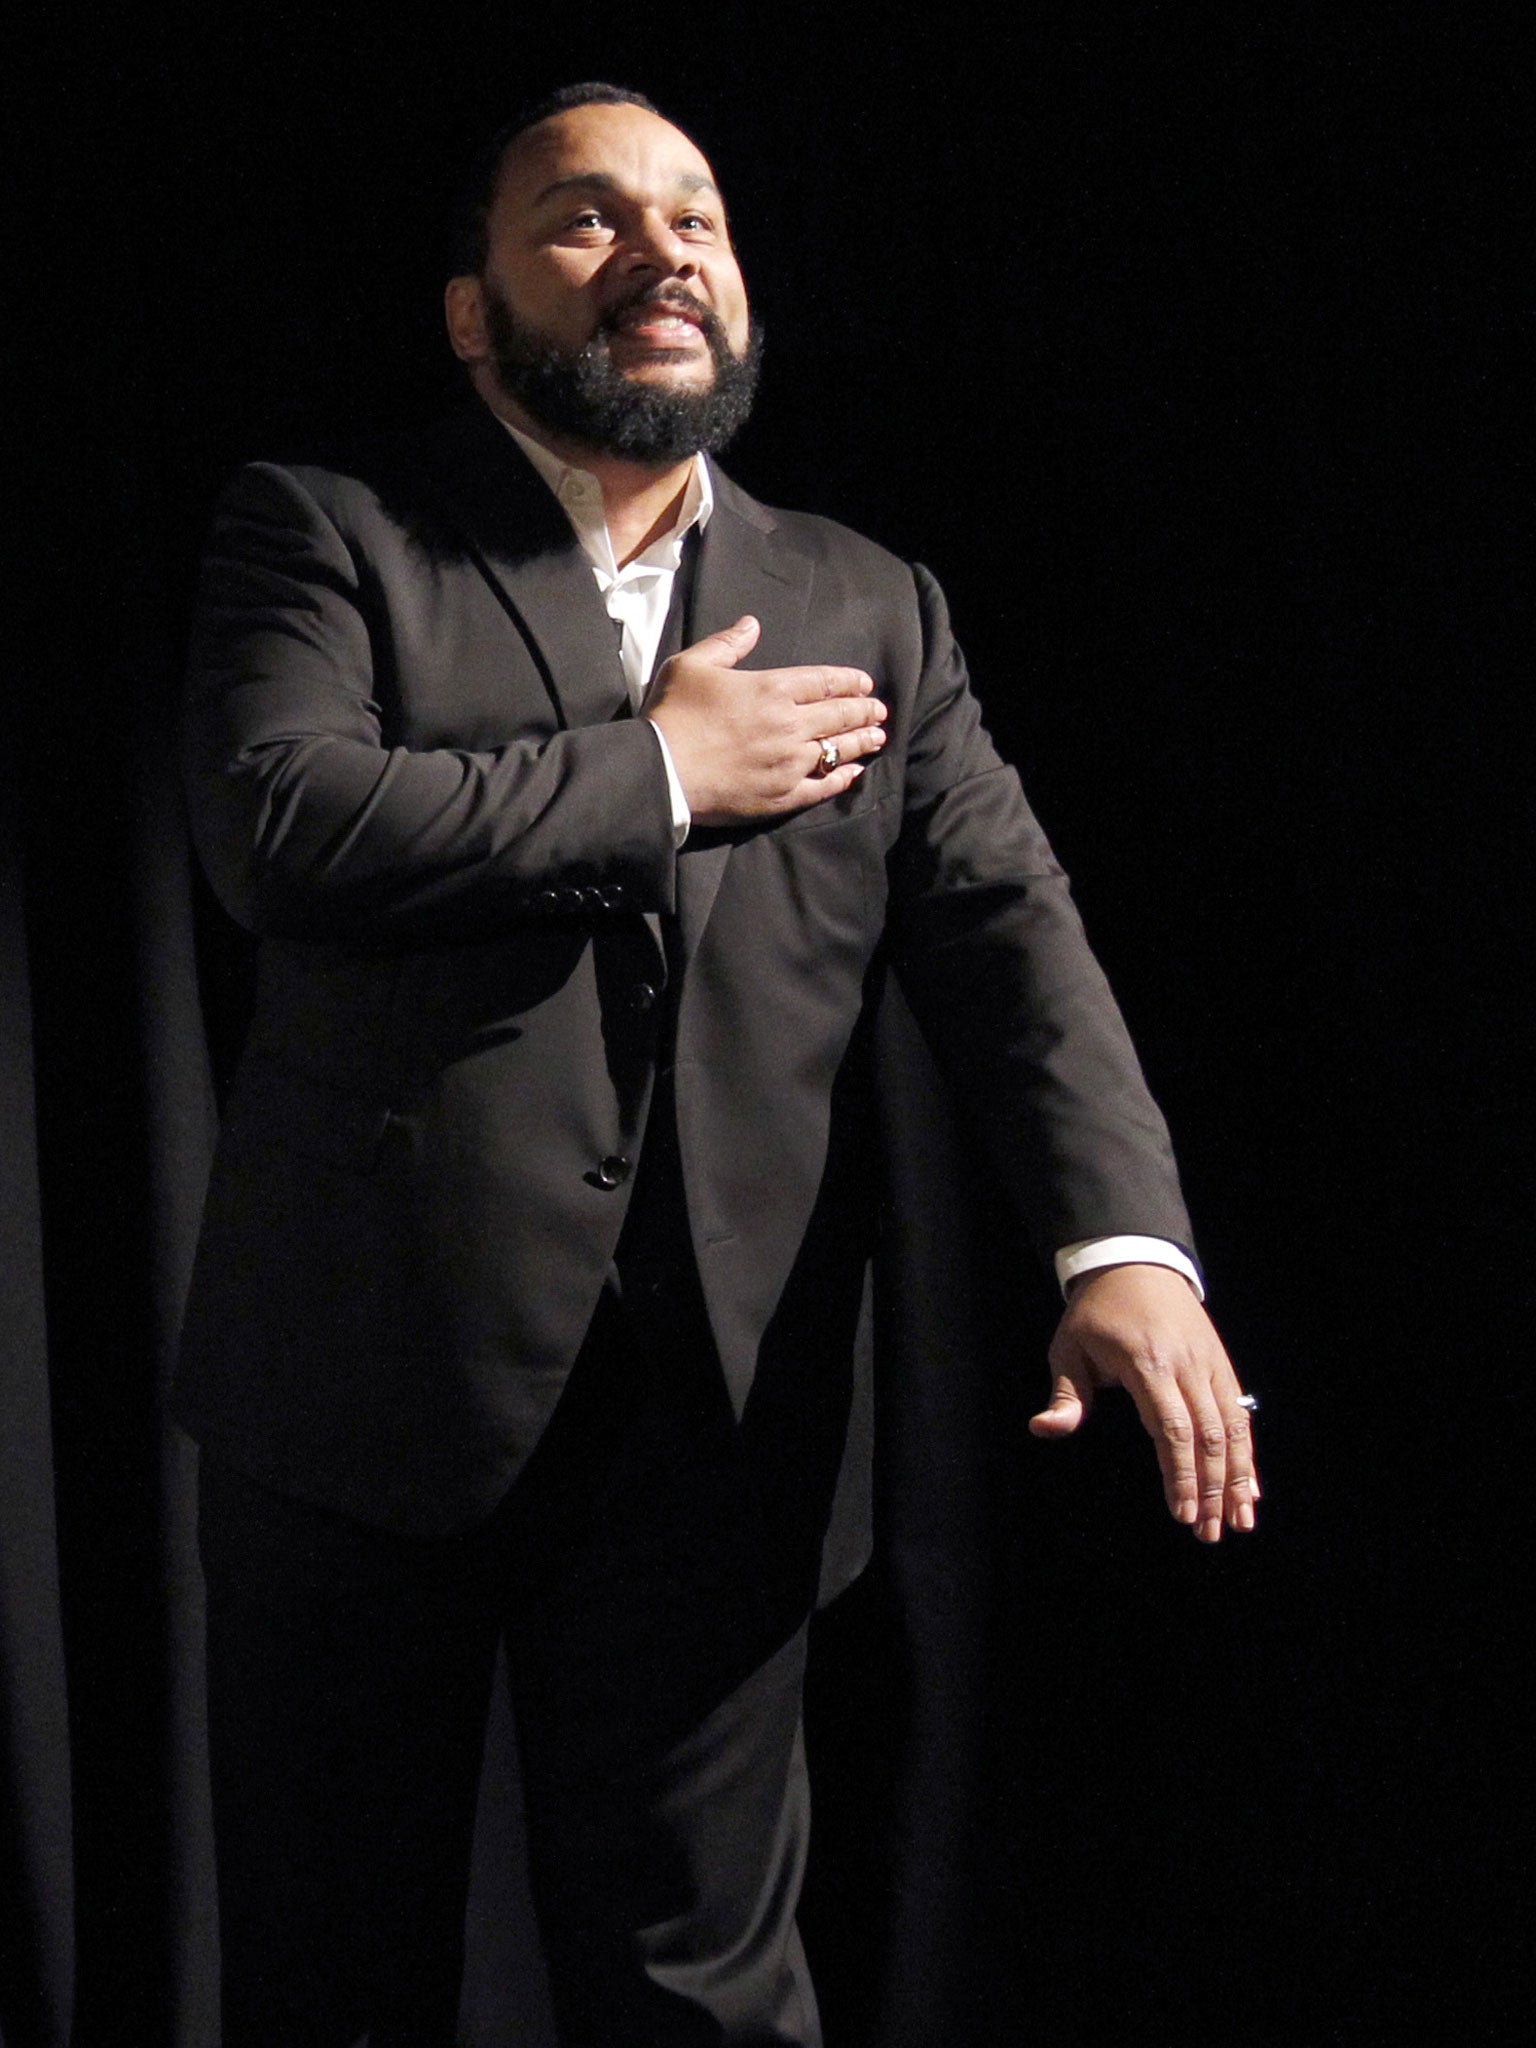 The comedian defends the 'quenelle', stating the gesture is not anti-semitic